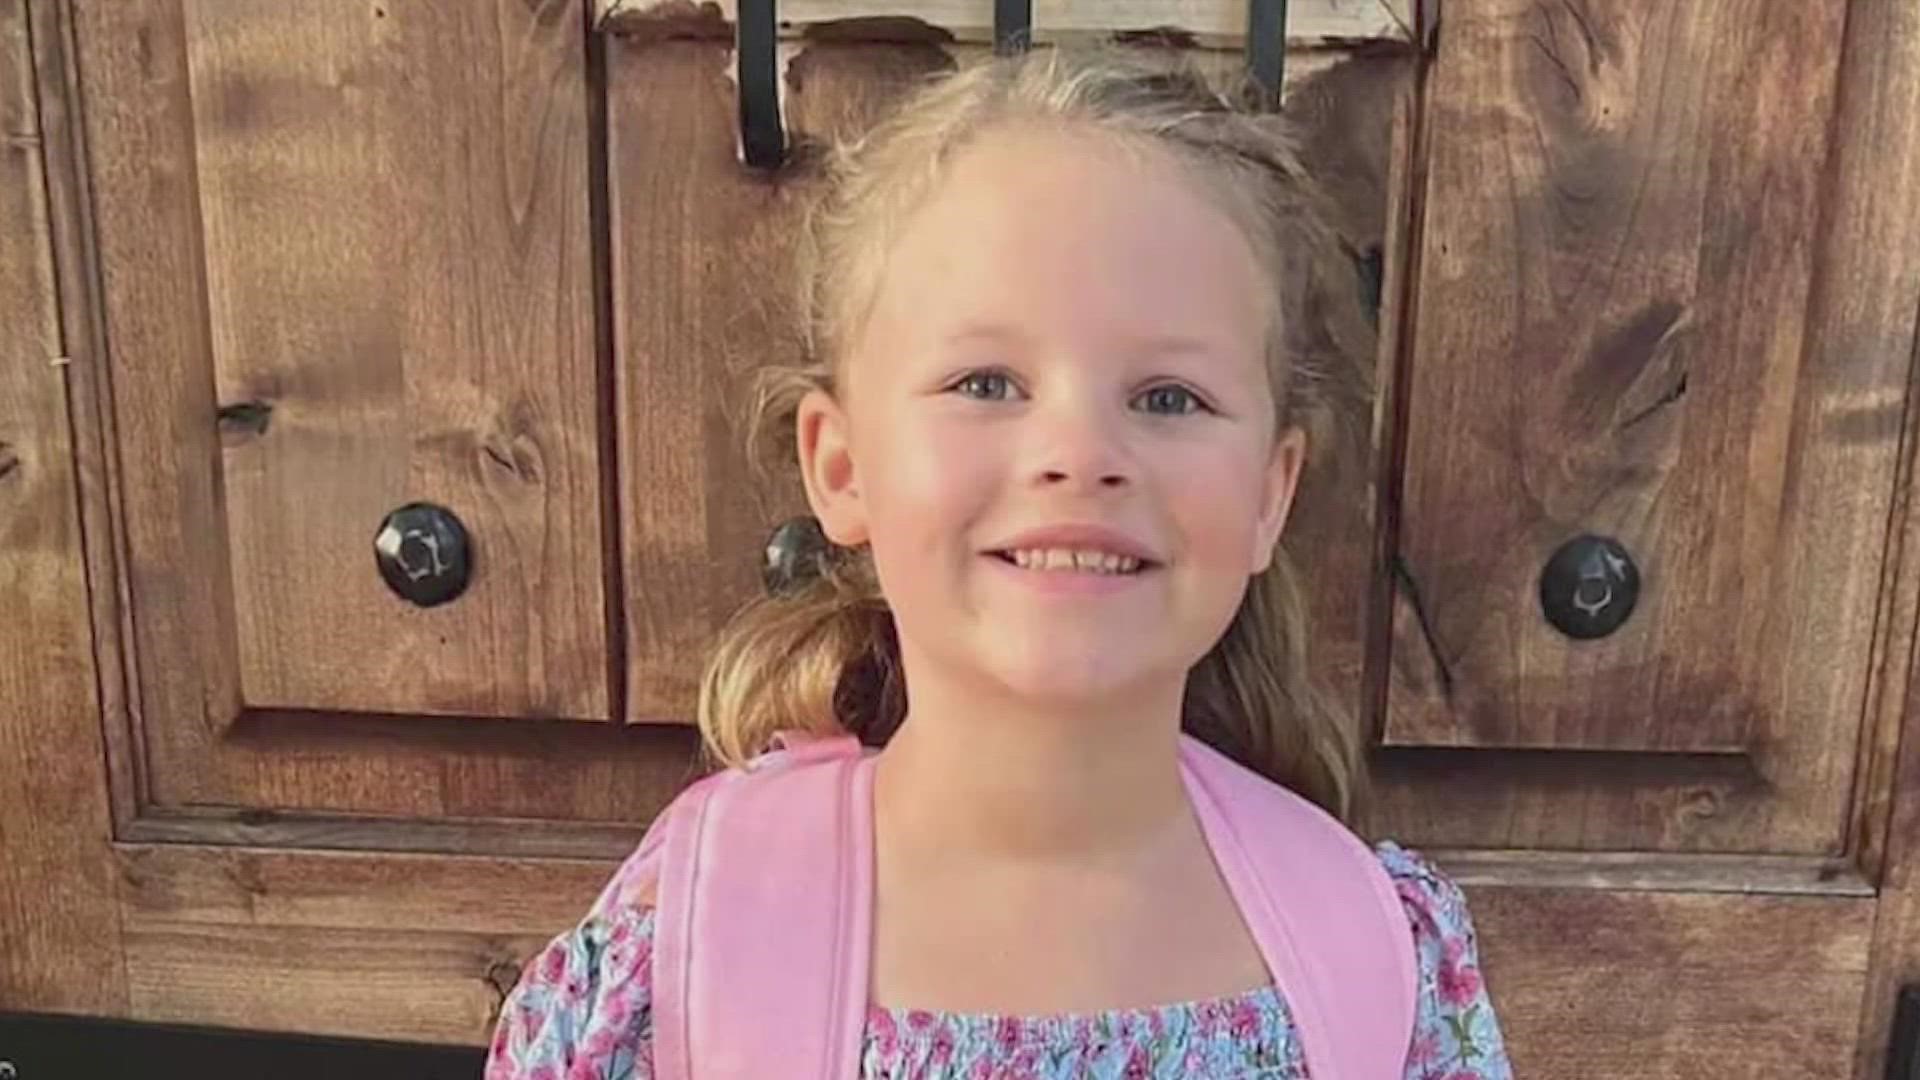 The 7-year-old was last seen Wednesday night.